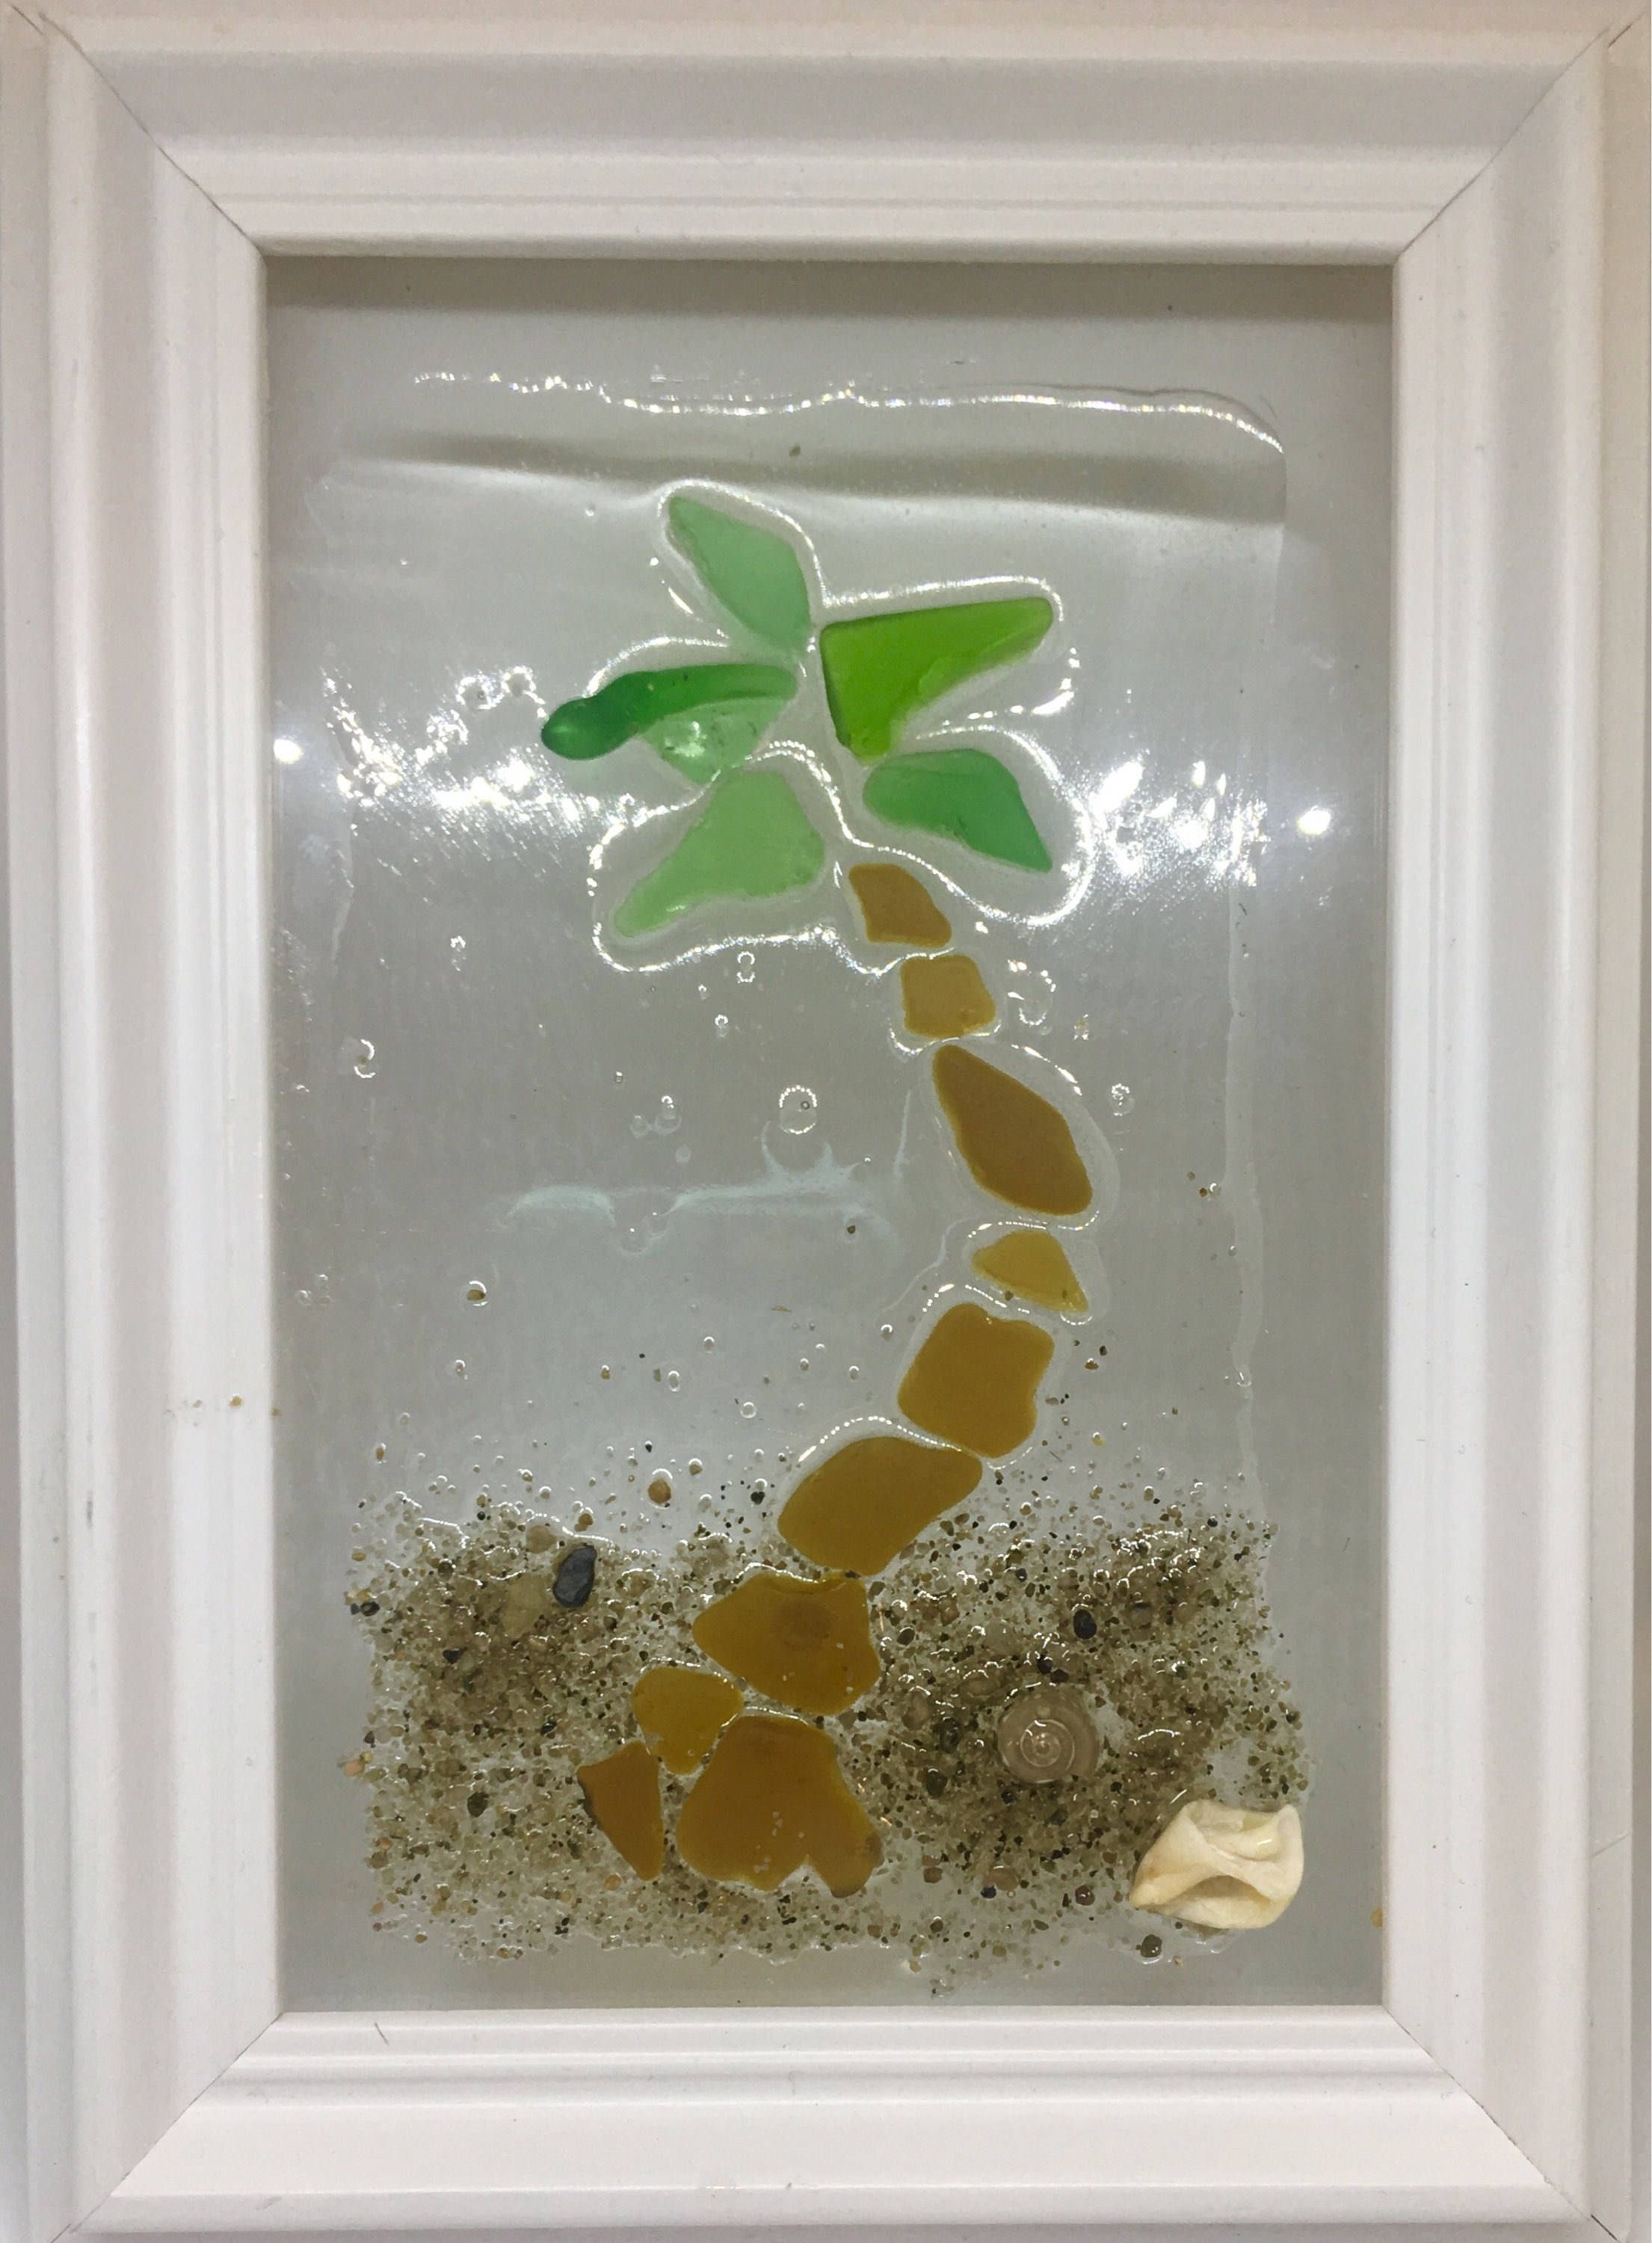 Sea Glass Wall Art: Palm Tree Design Made From Genuine Sea Glass 4x6 Intended For Sea Glass Wall Art (Photo 1 of 20)